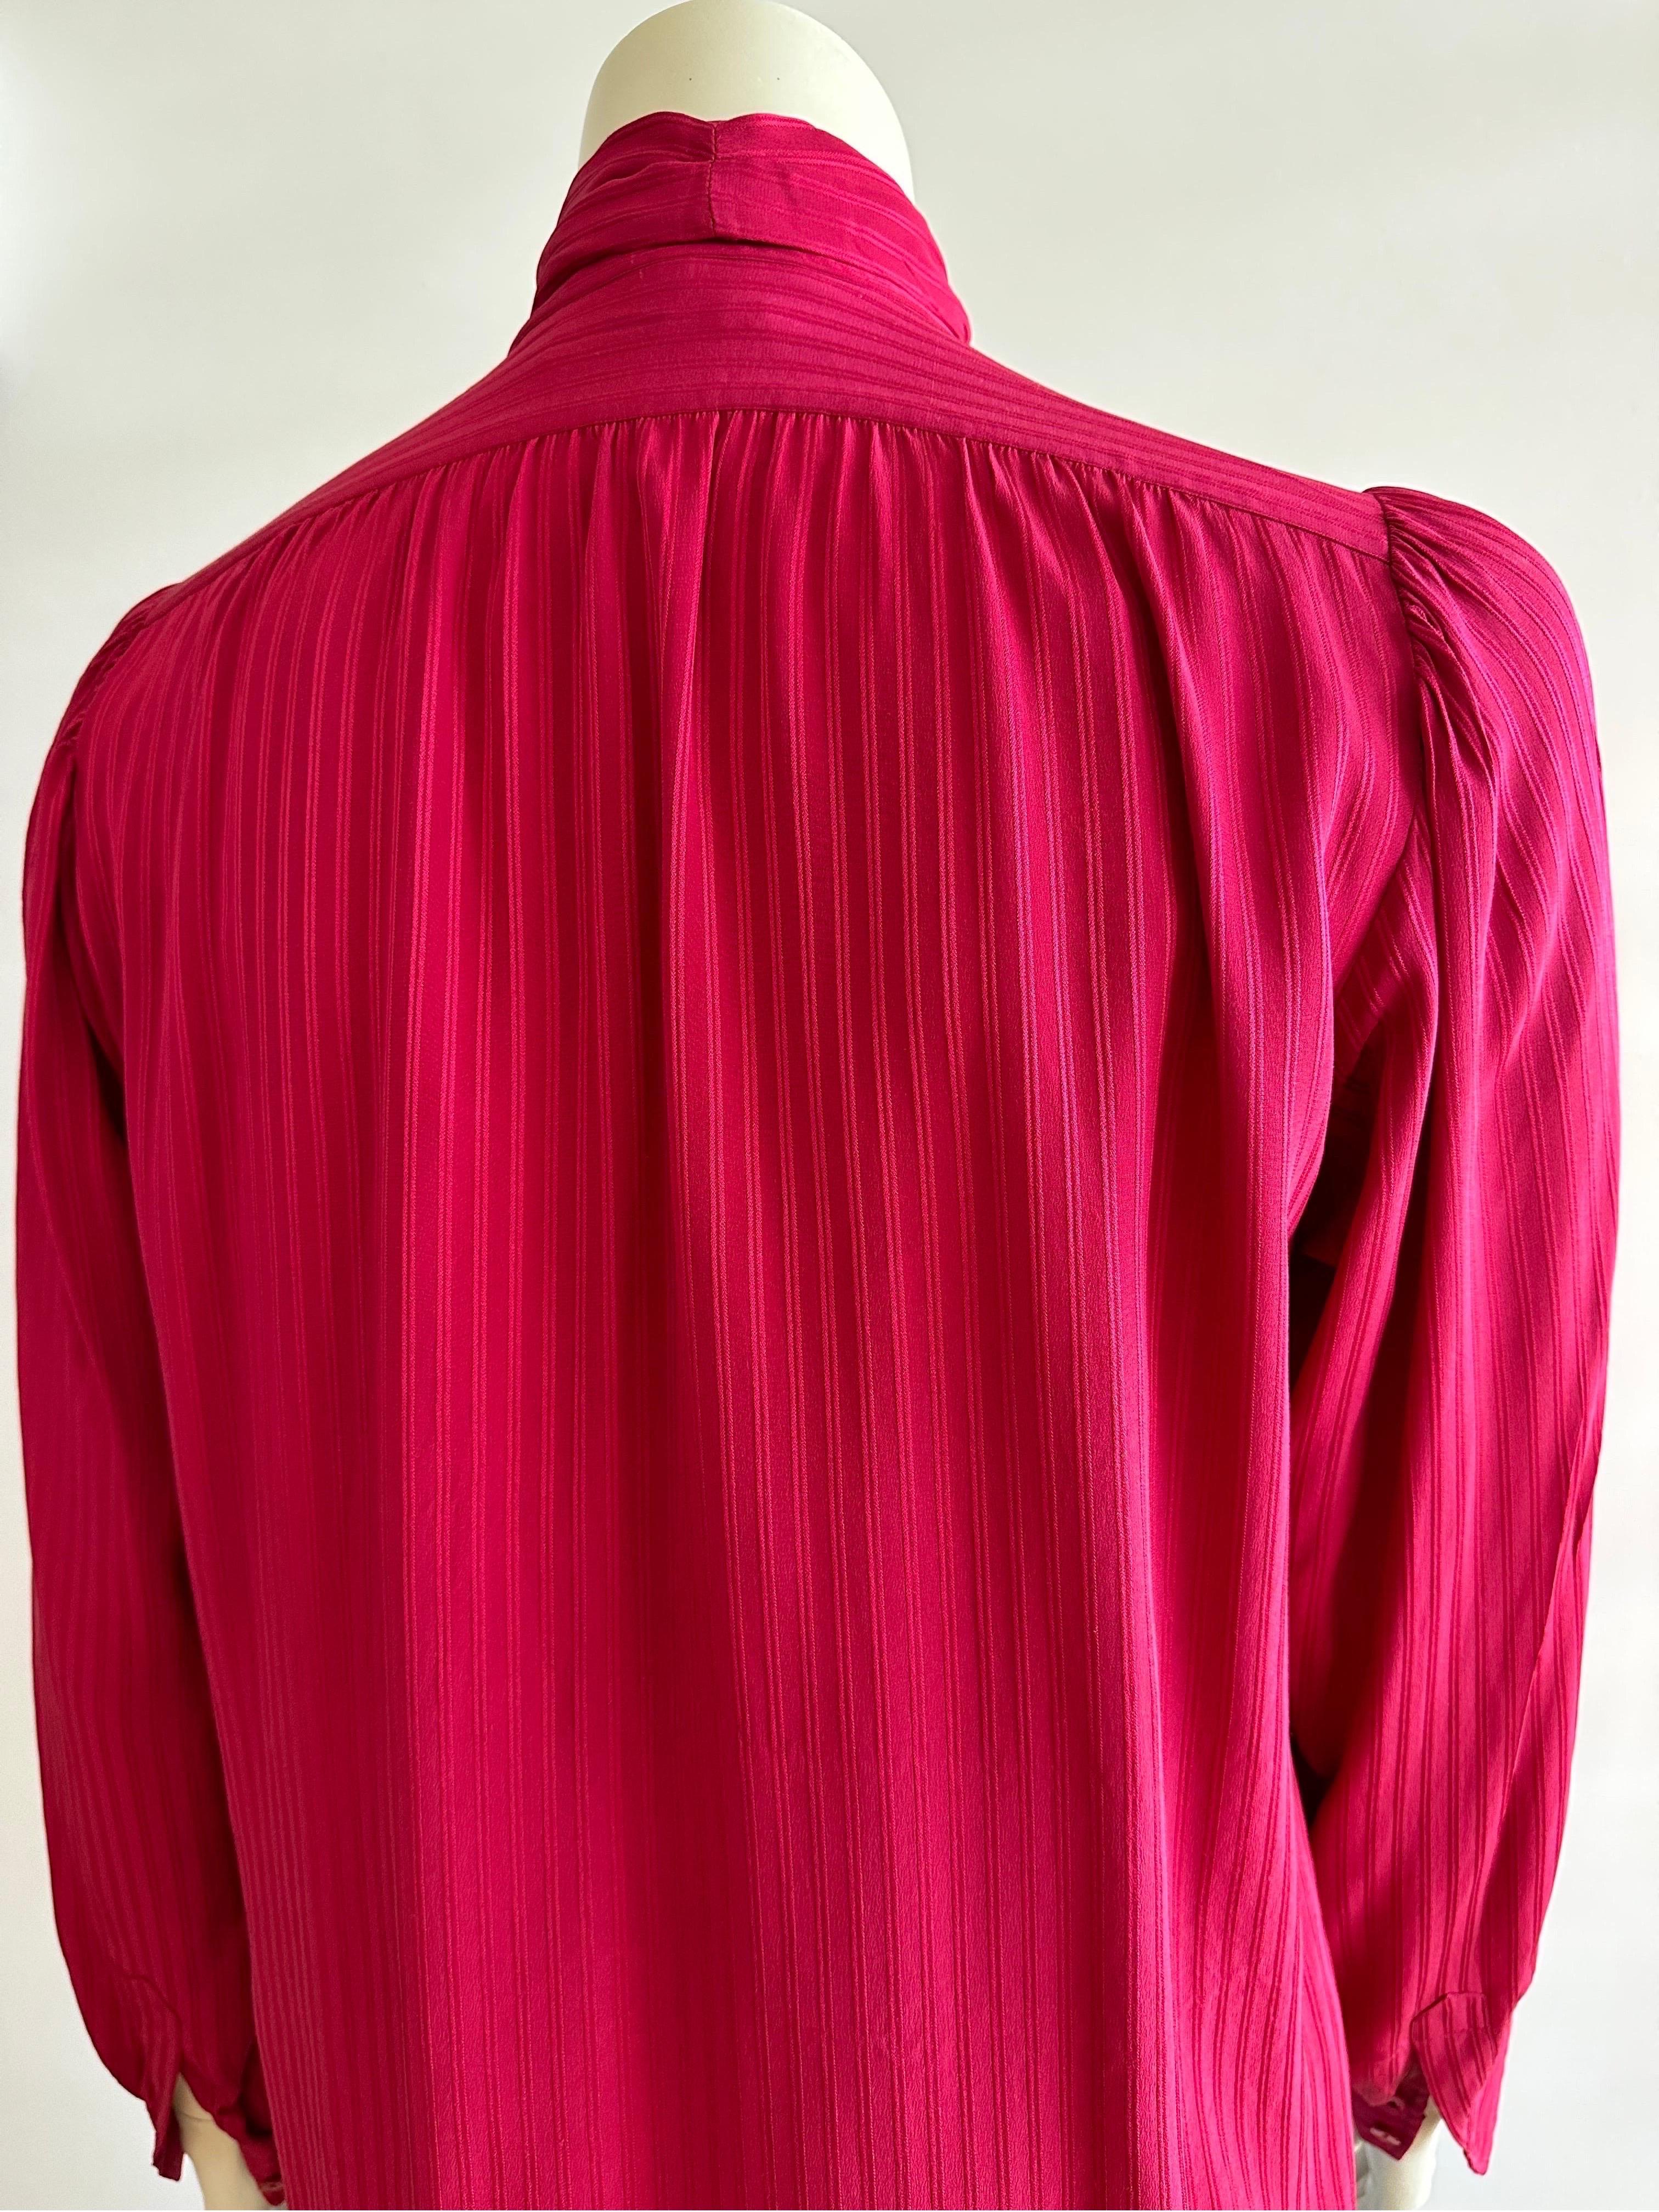 YSL Yves saint Laurent lavalliere blouse in red silk  For Sale 2